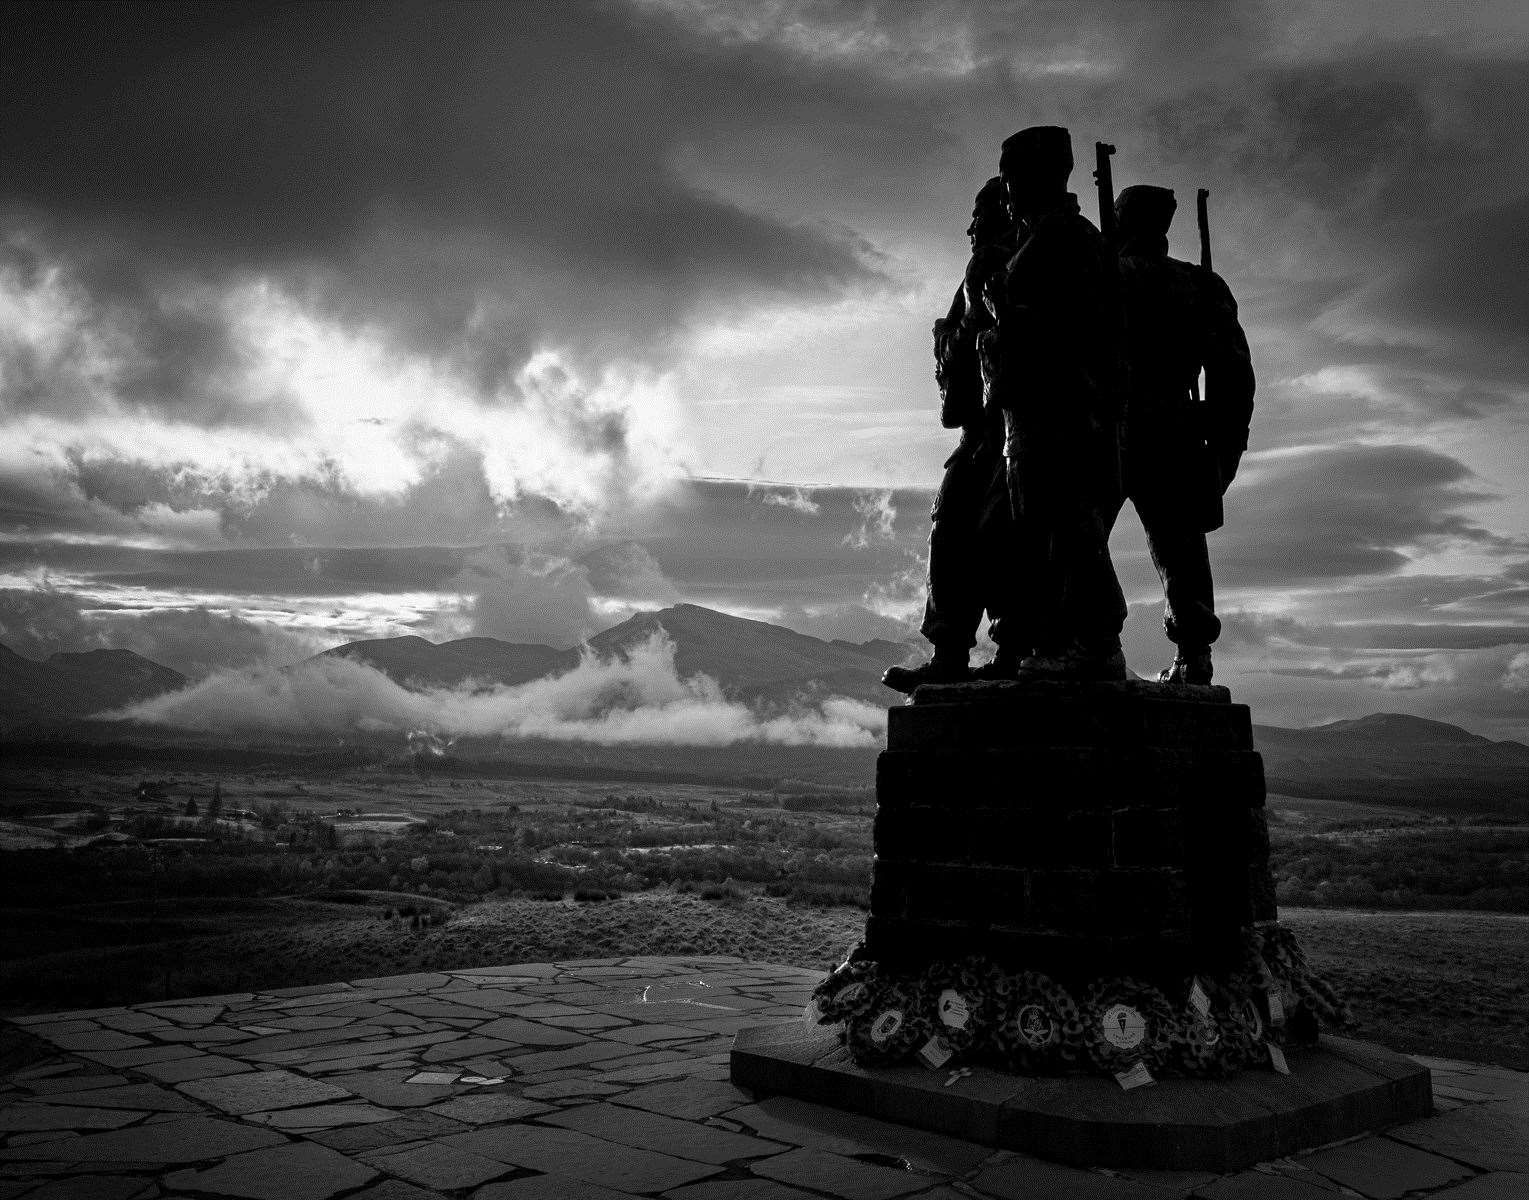 A moving photo of the Commando War Memorial at Spean Bridge earned Andy Kirby second place in the monochrome category.